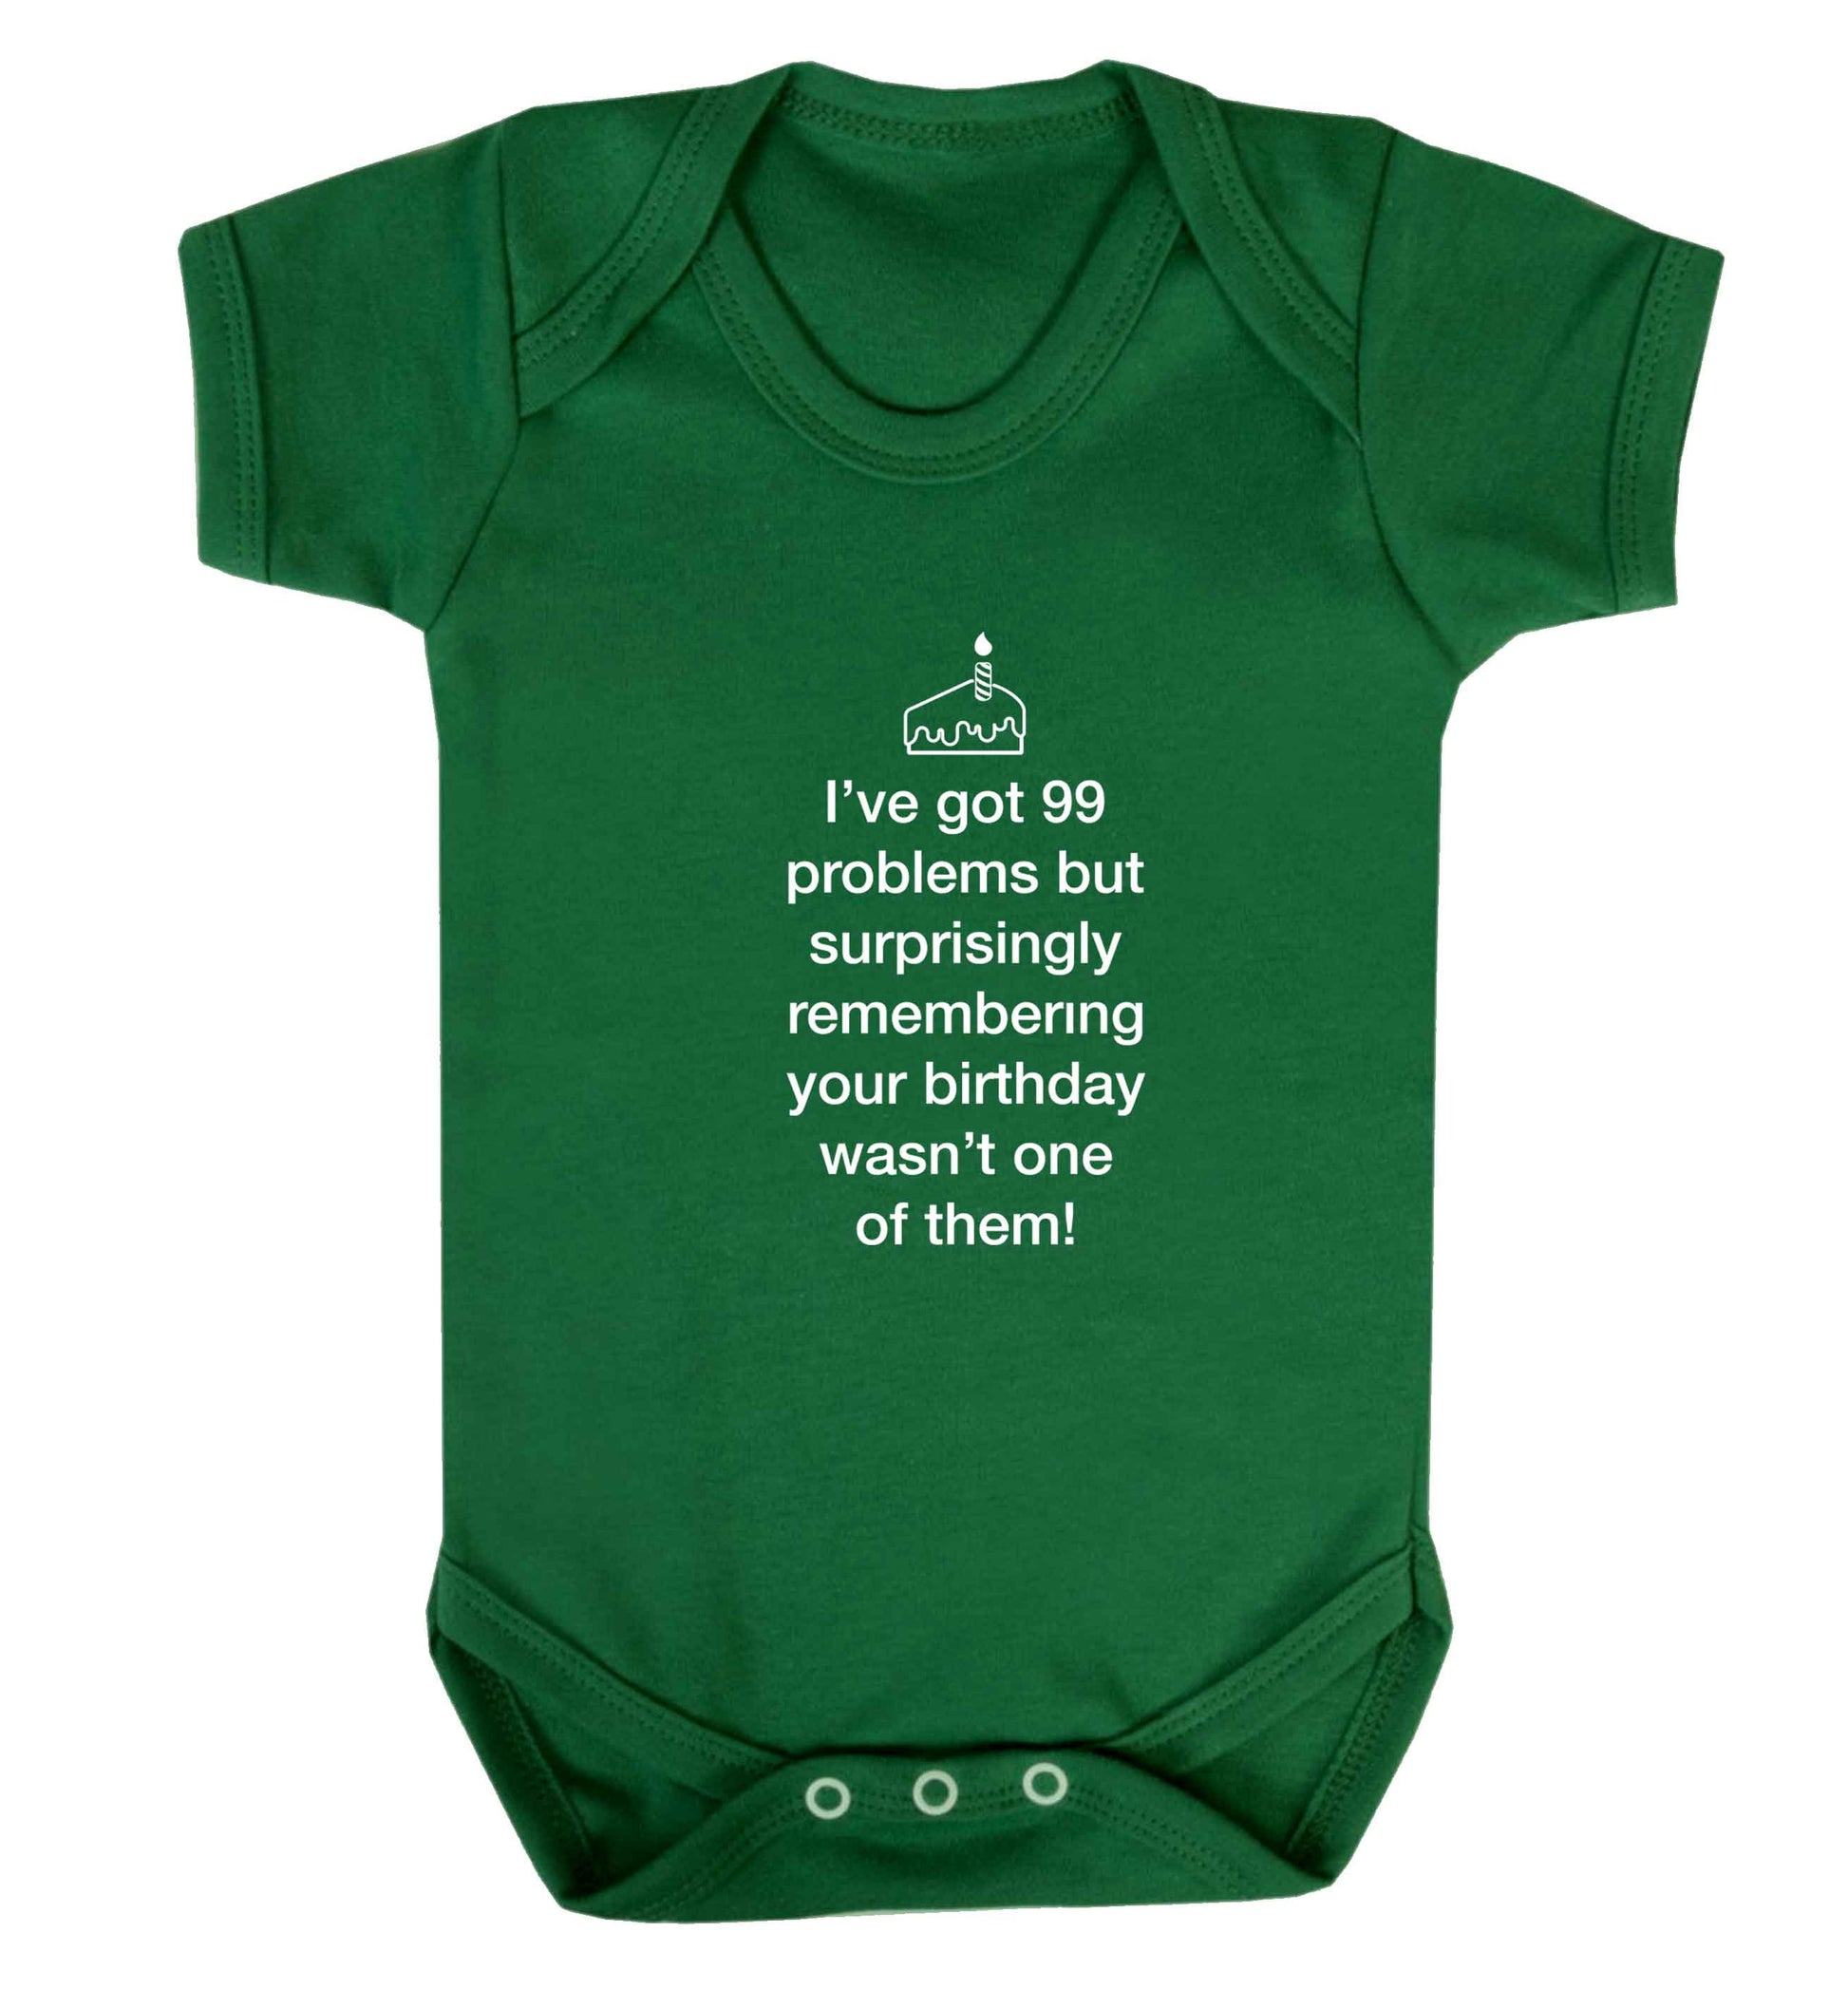 I've got 99 problems but surprisingly remembering your birthday wasn't one of them! baby vest green 18-24 months